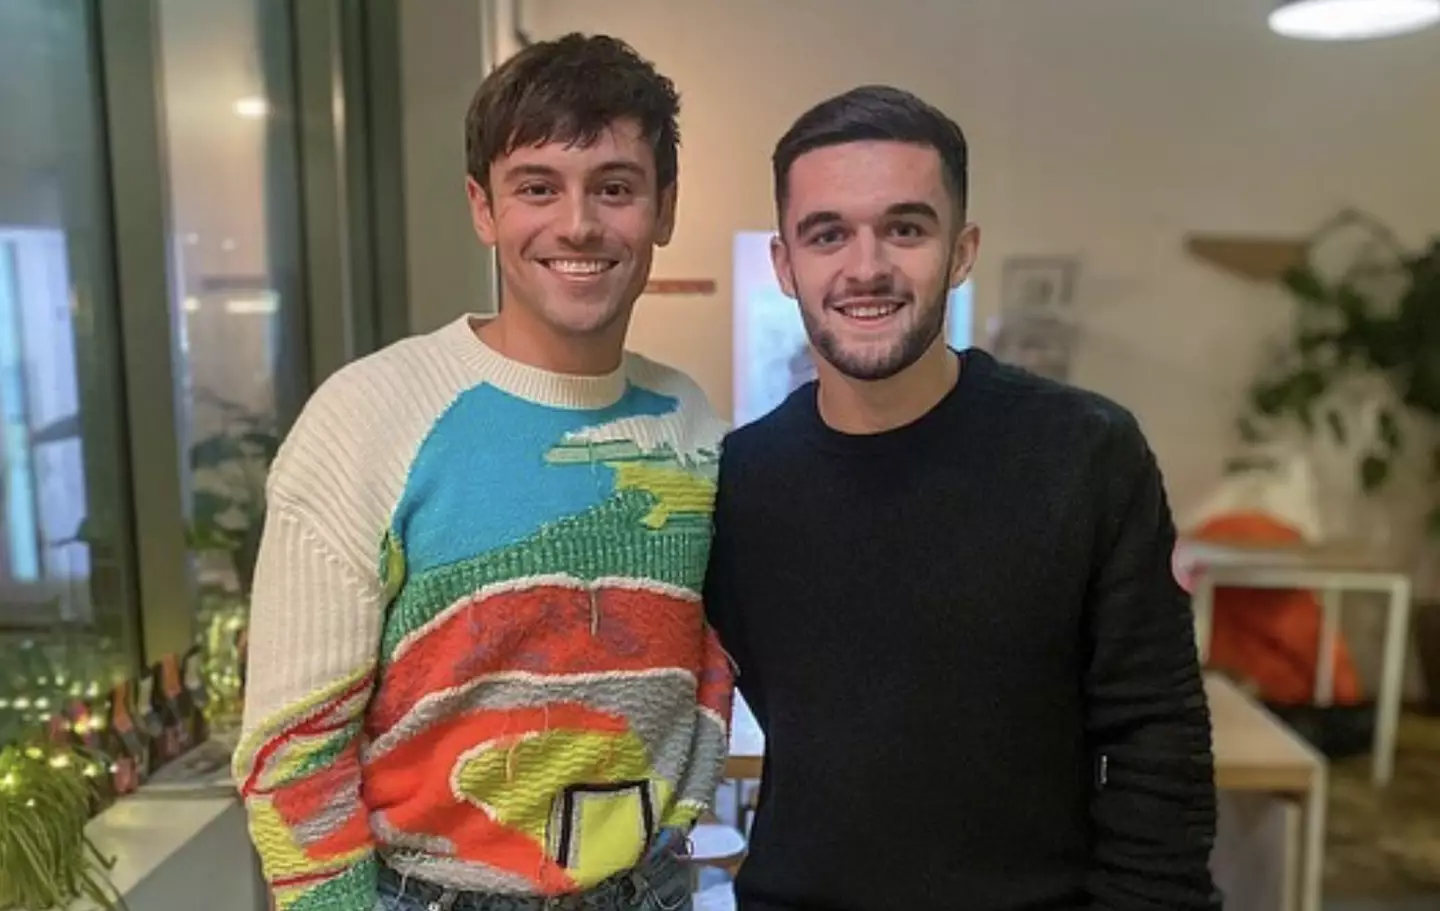 Jake Daniels has previously said diver Tom Daley was one of several sports starts who inspired him to come out.